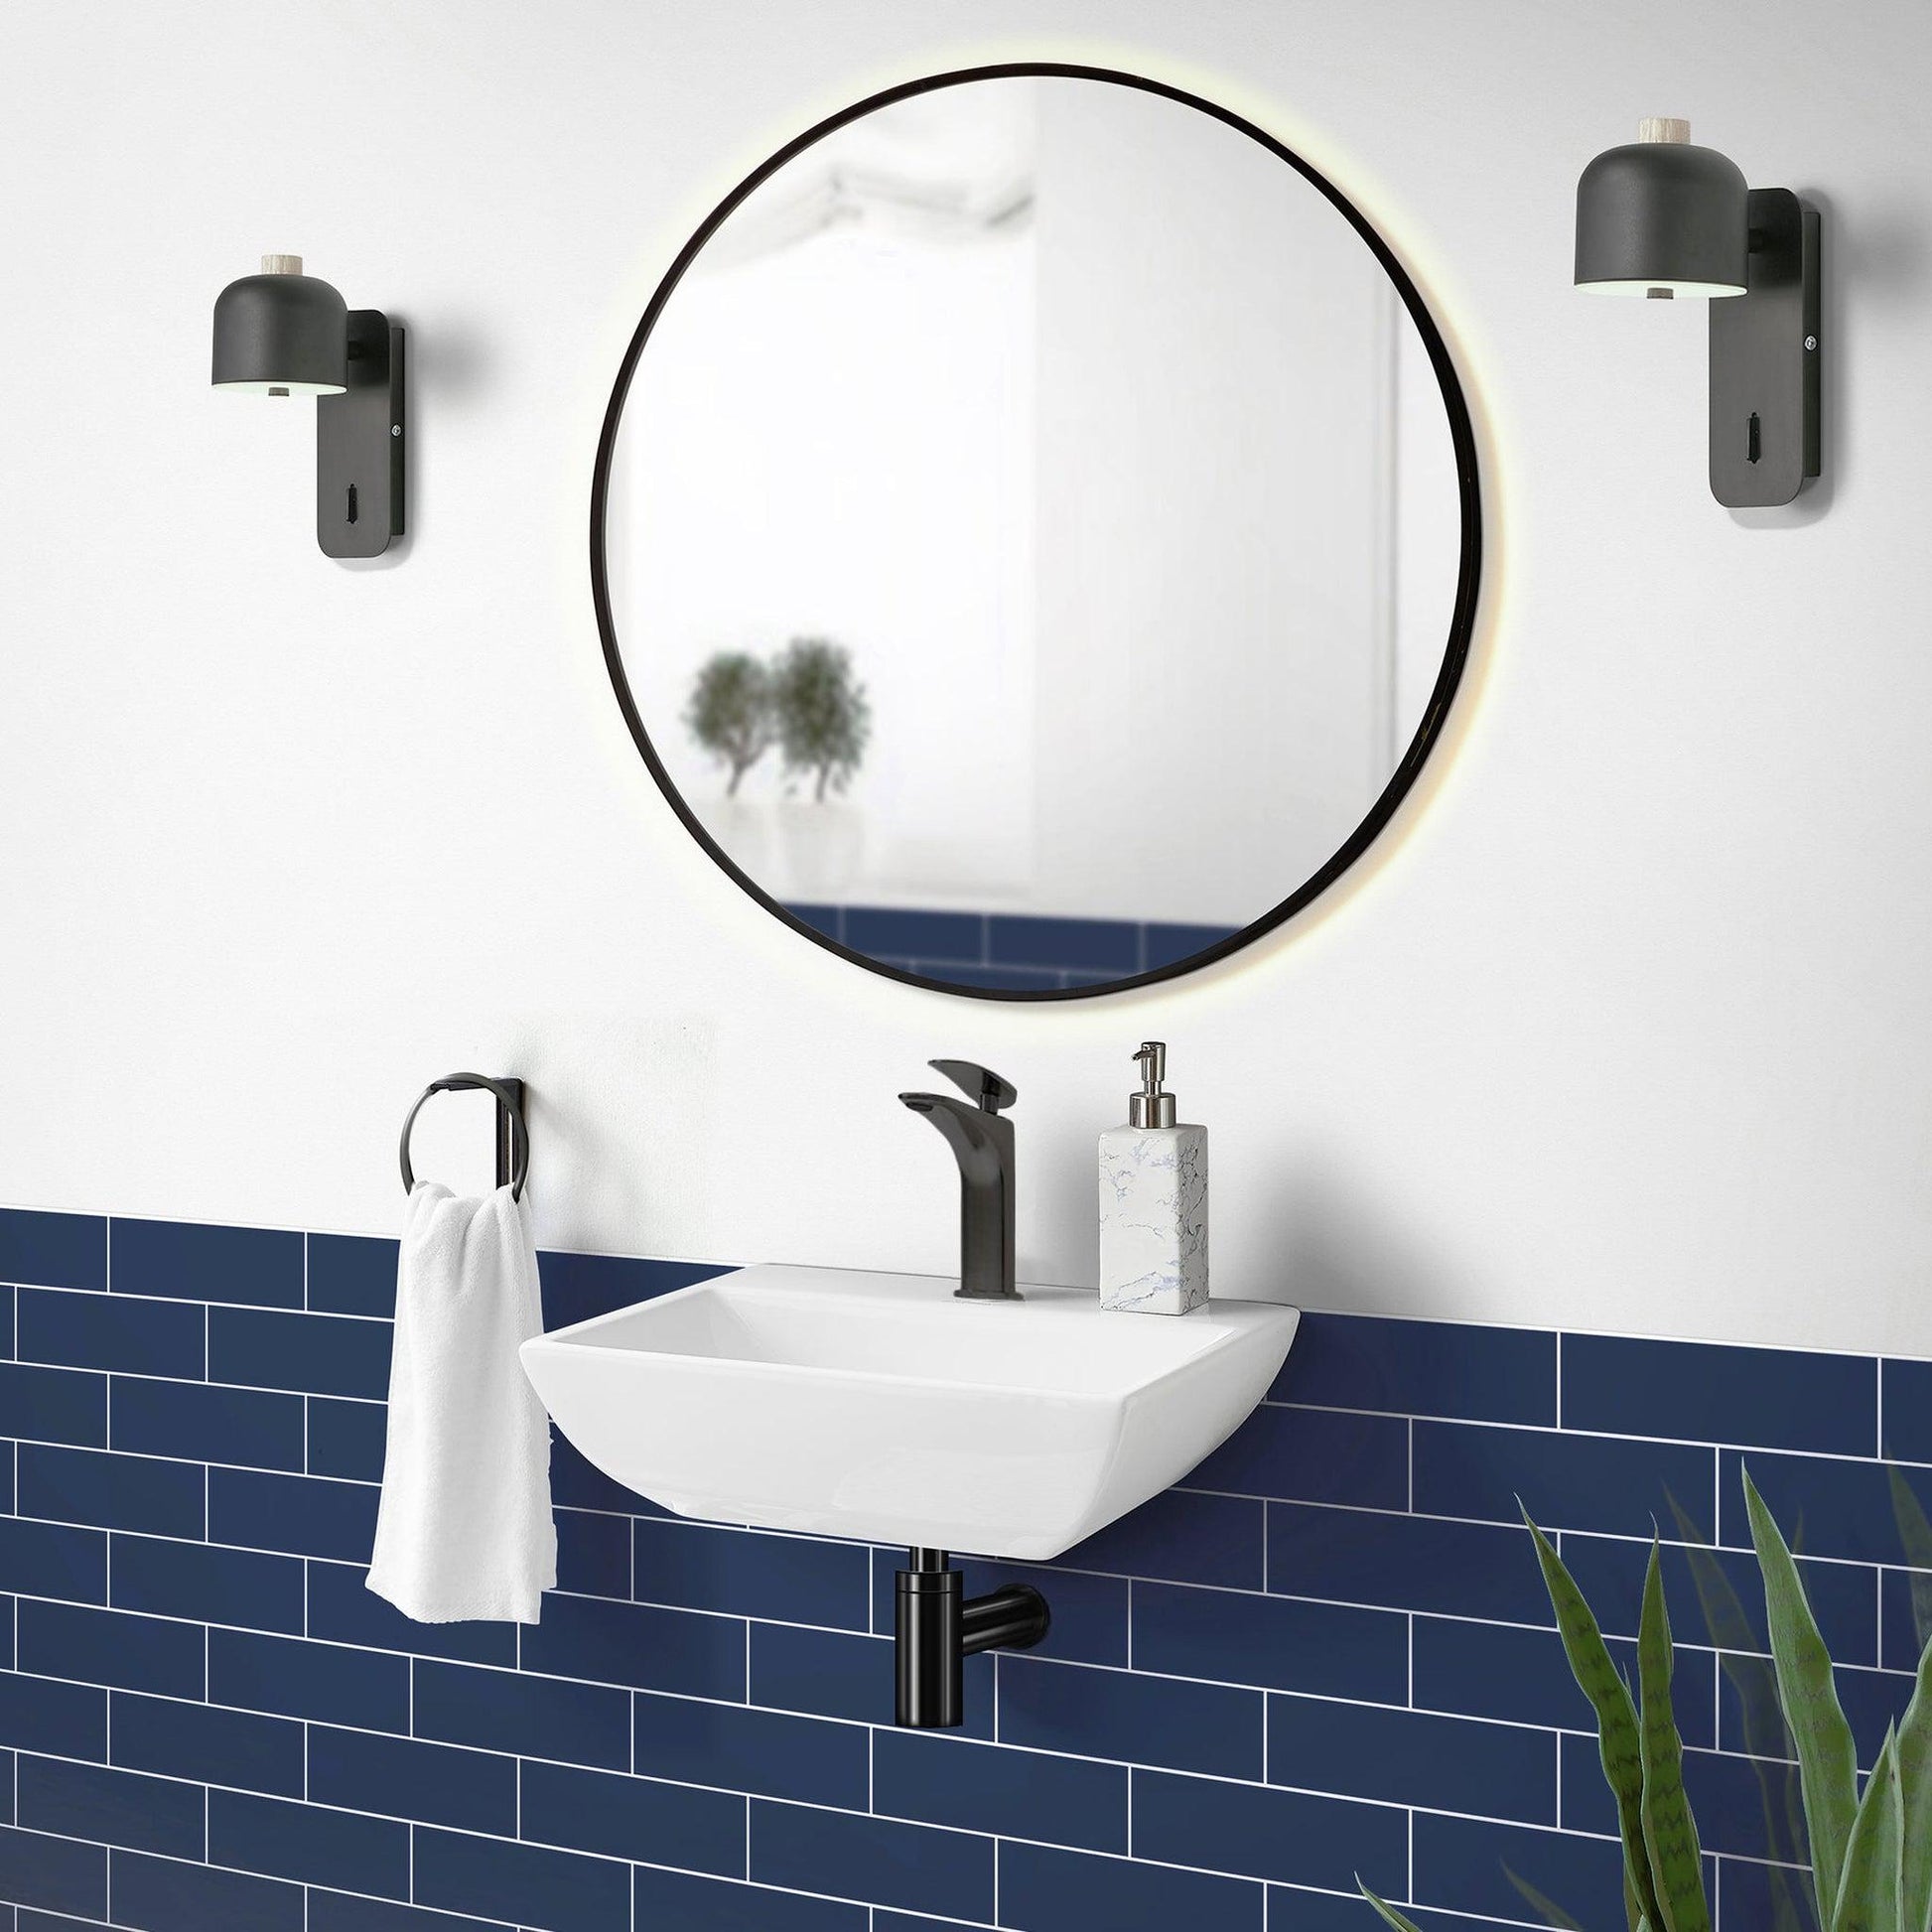 Swiss Madison Sublime 18" x 14" Rectangular White Ceramic Wall-Hung Bathroom Sink With Single Hole Faucet